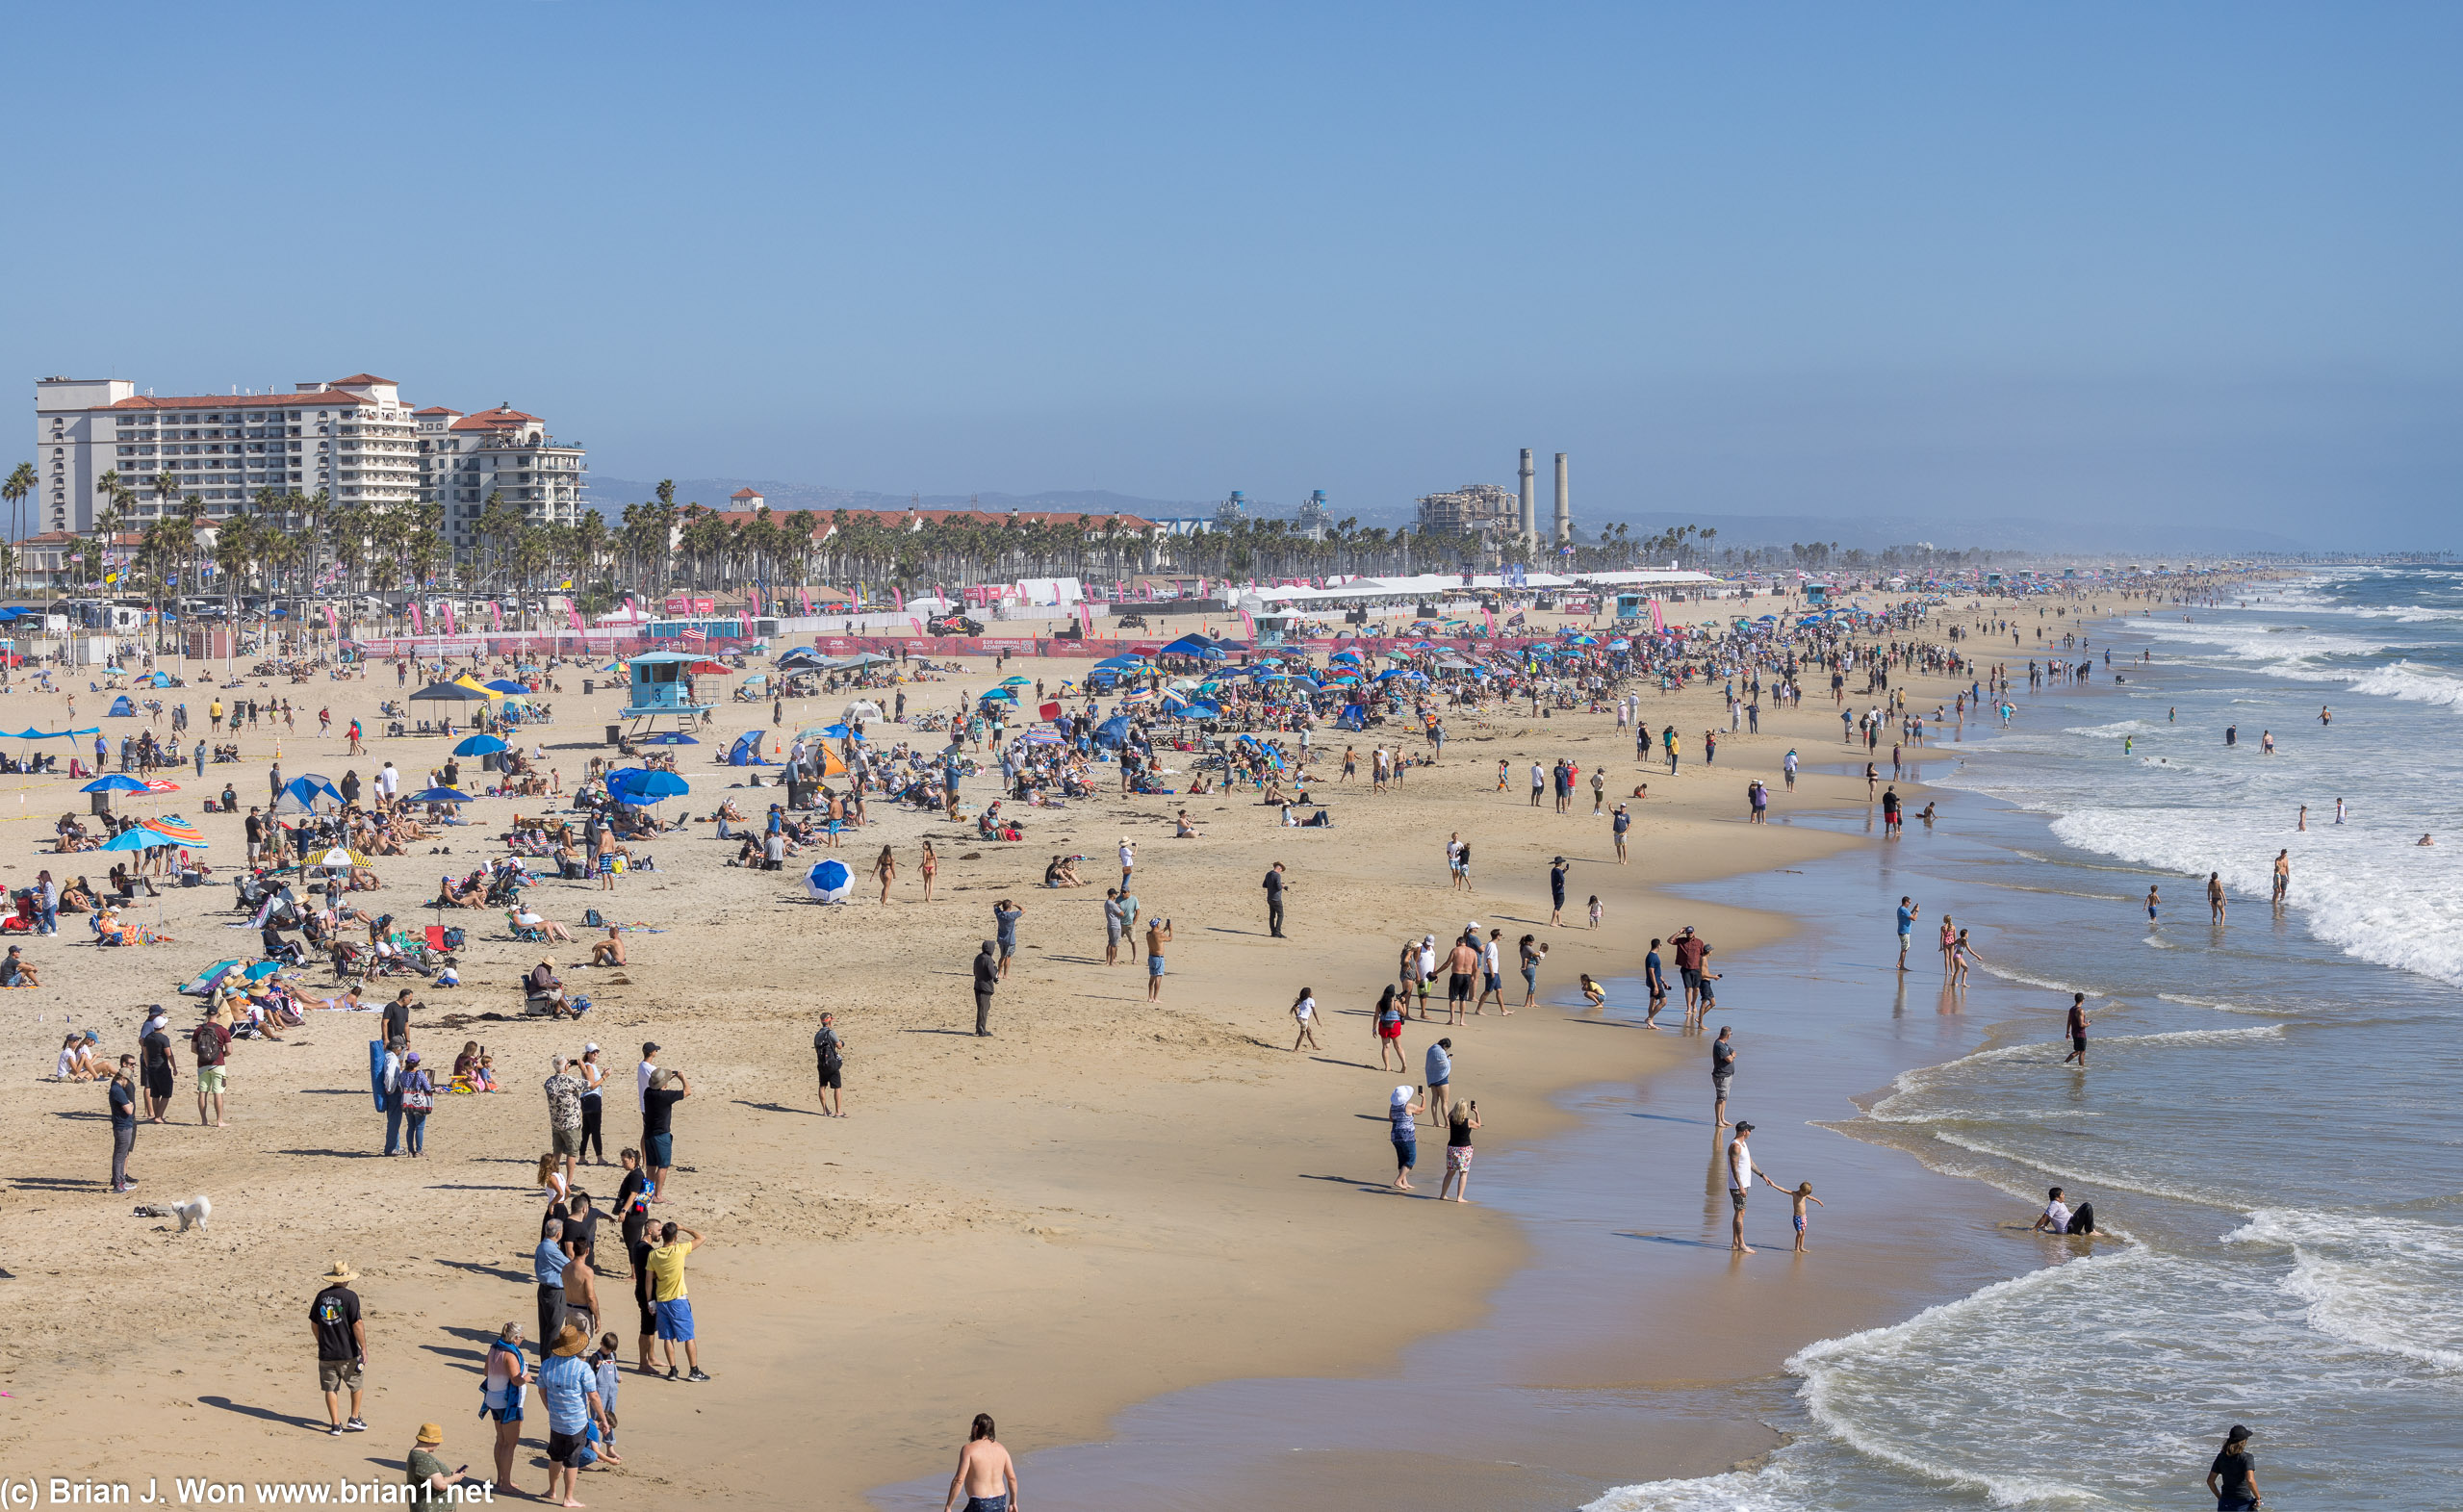 The beach is crowded with both beachgoers and spectators.